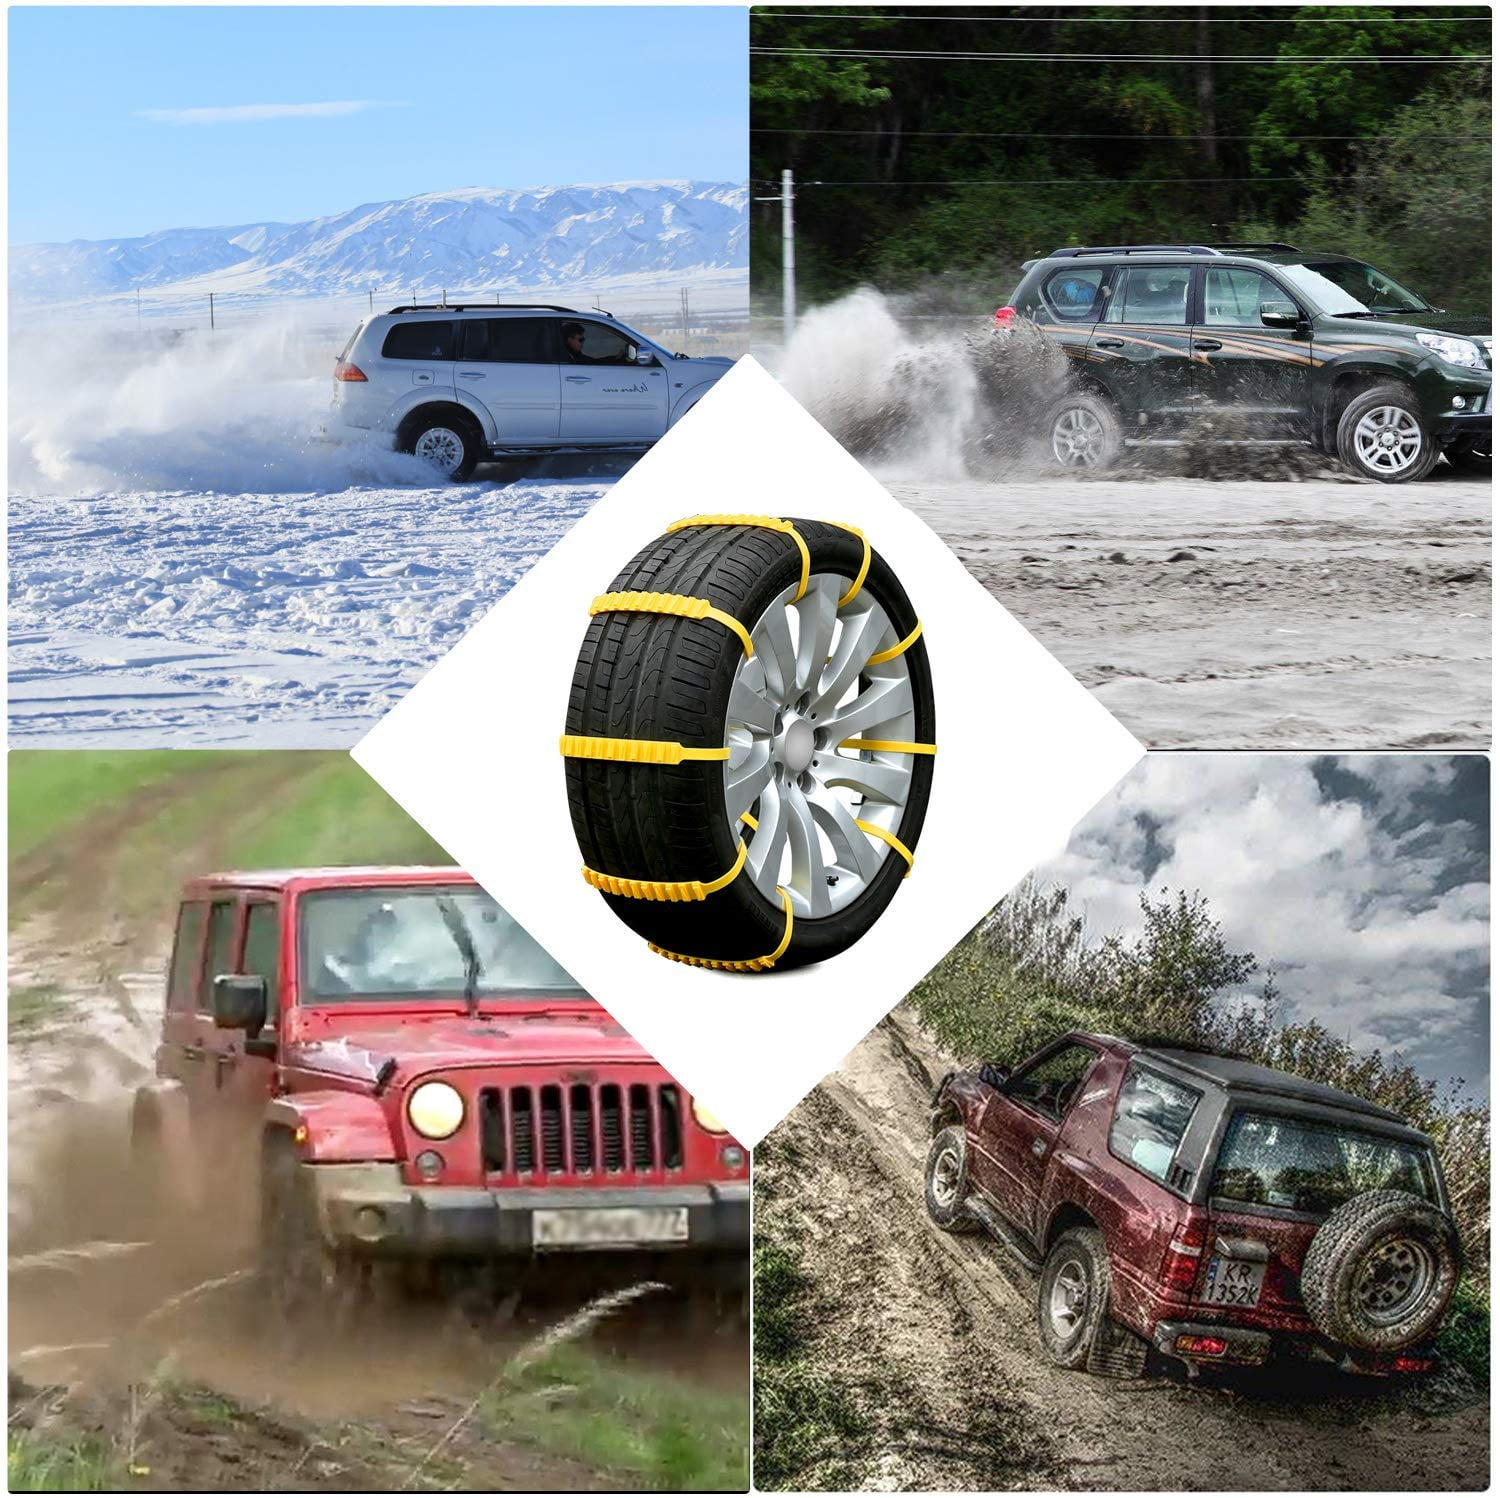 Snow Tire Chains Straps Car Safety Chains Snow Chains Tire Cables Traction for Cars Mud Sand Water Any Snow Raining Slippery Road,Ice Breaker Self-Driving Tour Essential,30 Seconds Quick Installation 